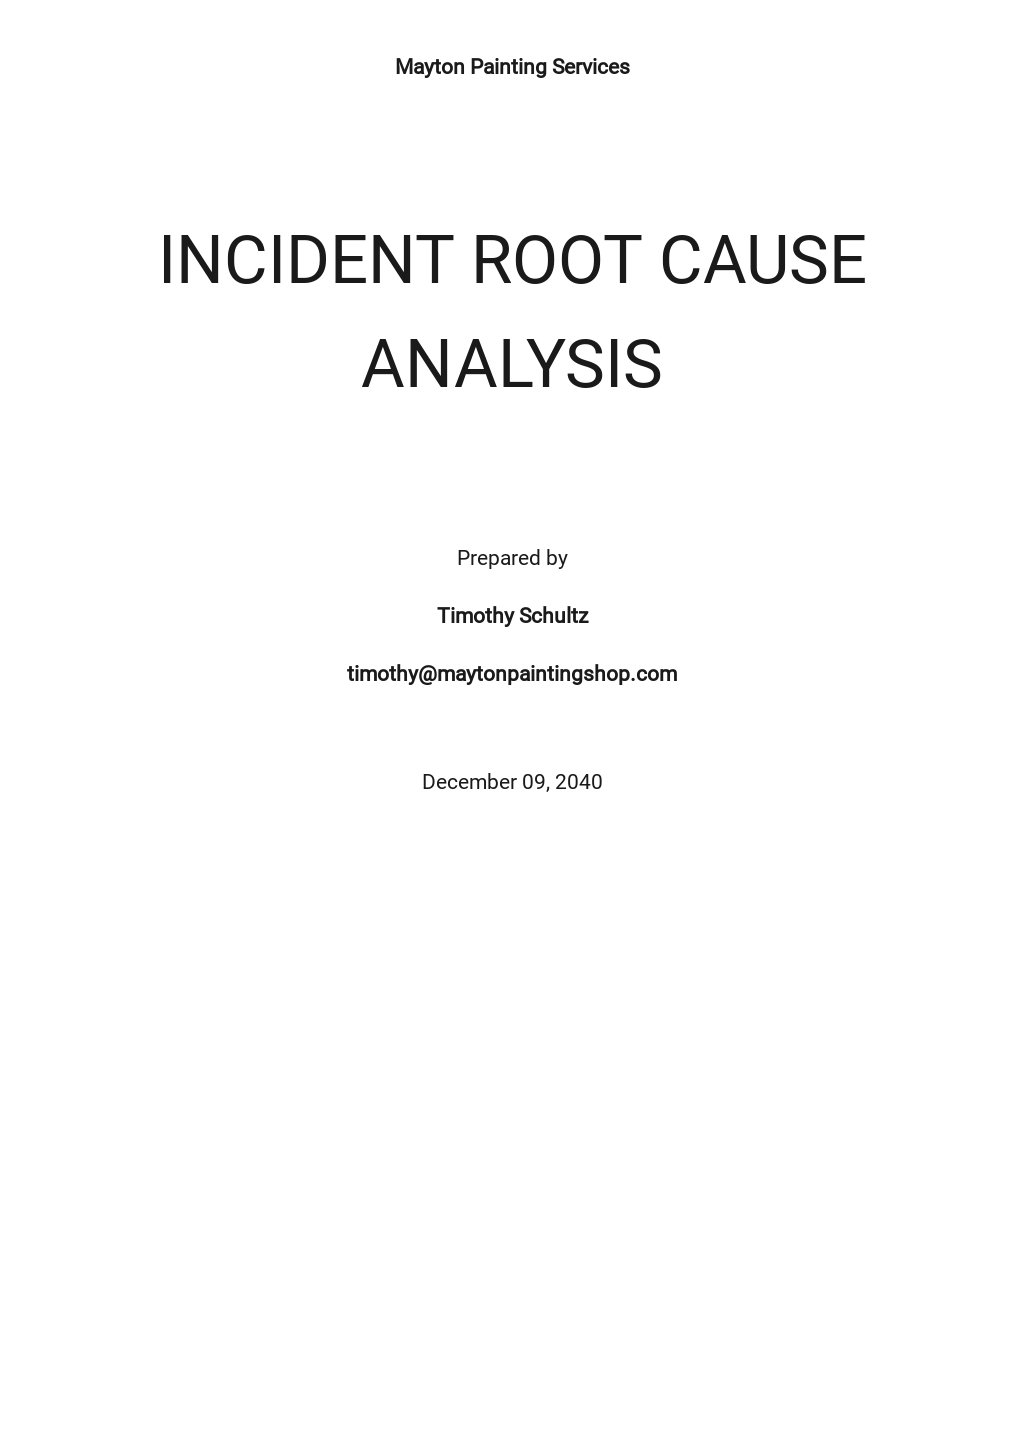 Incident Root Cause Analysis Template.jpe